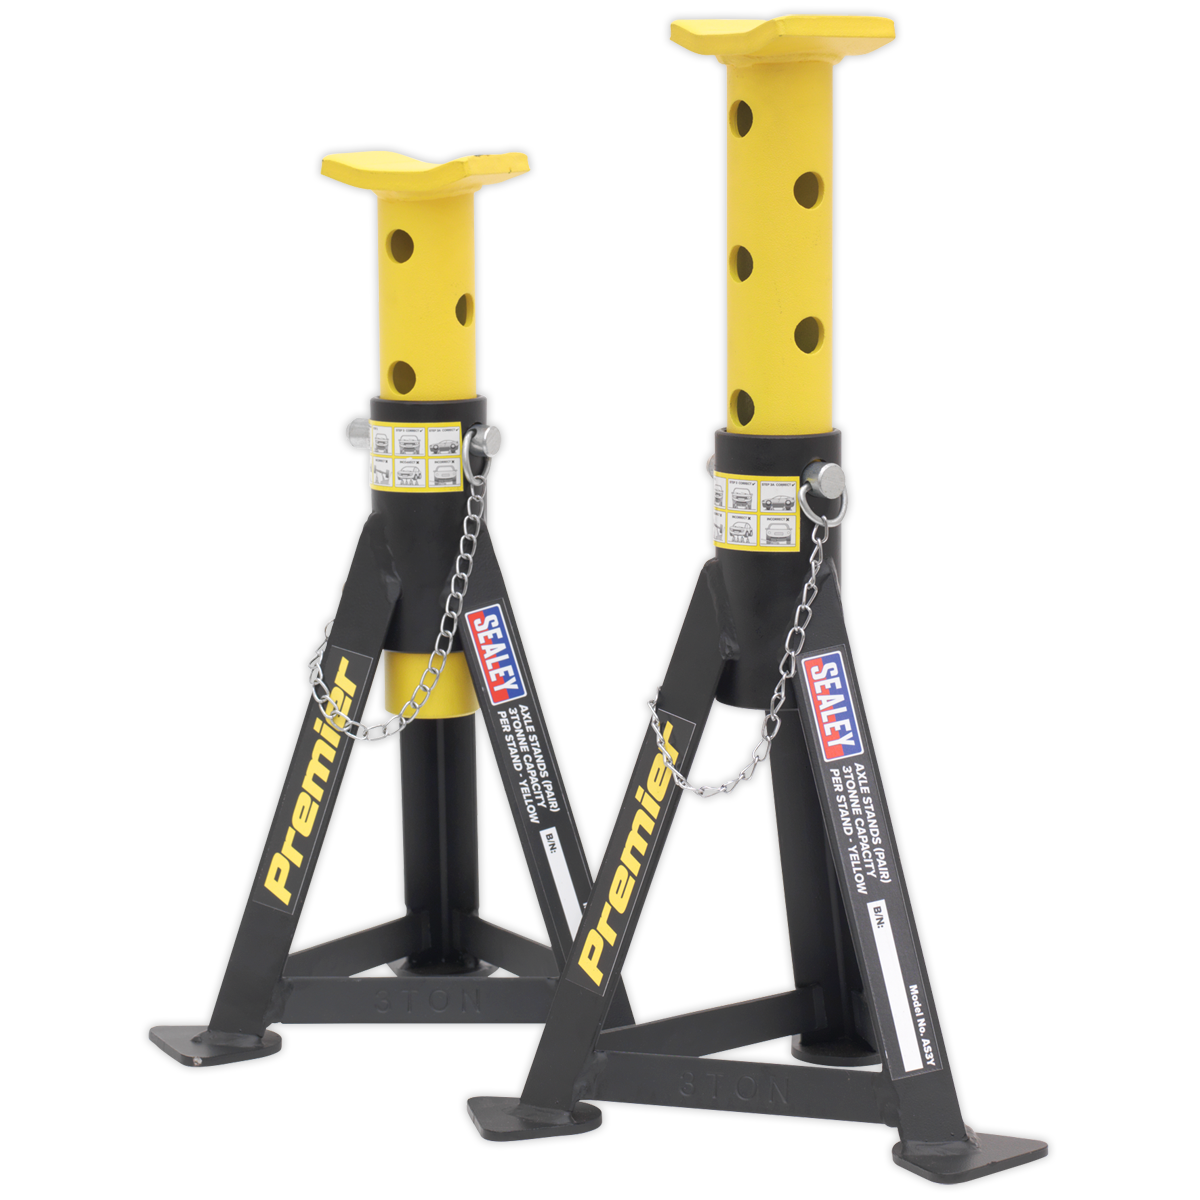 SEALEY - AS3Y Axle Stands (Pair) 3tonne Capacity per Stand - Yellow